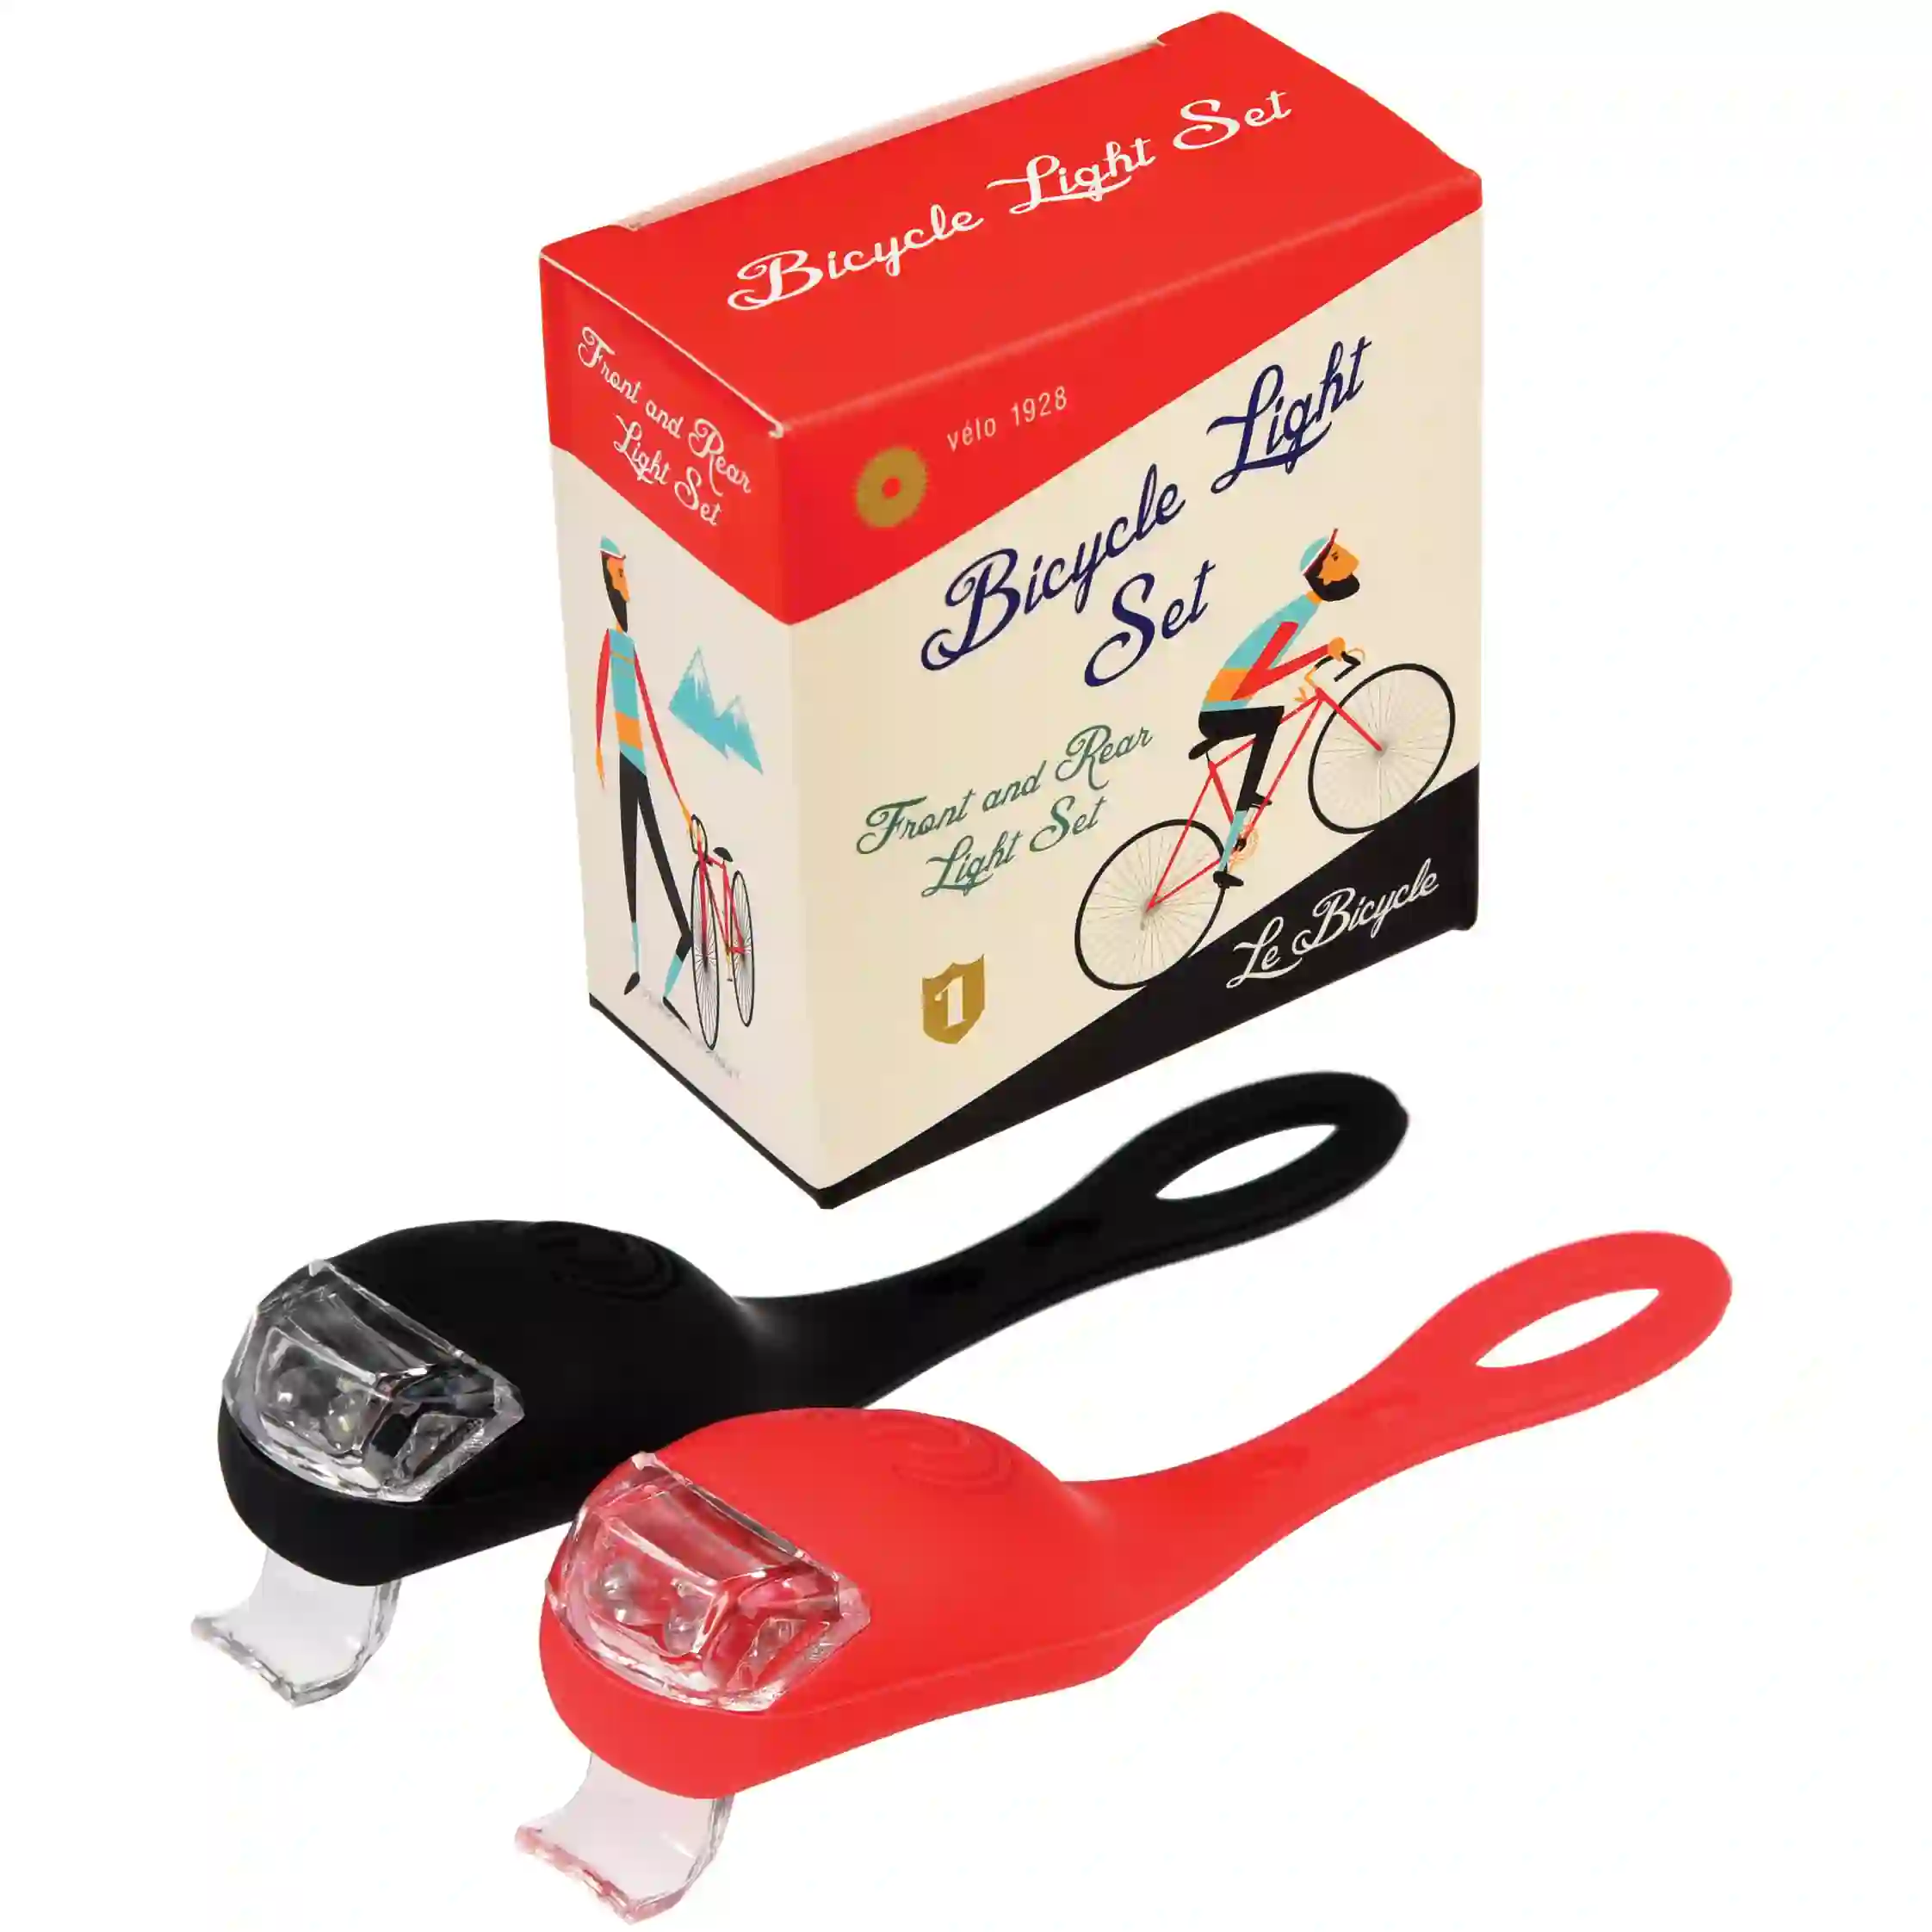 2 led bicycle lights in box - le bicycle